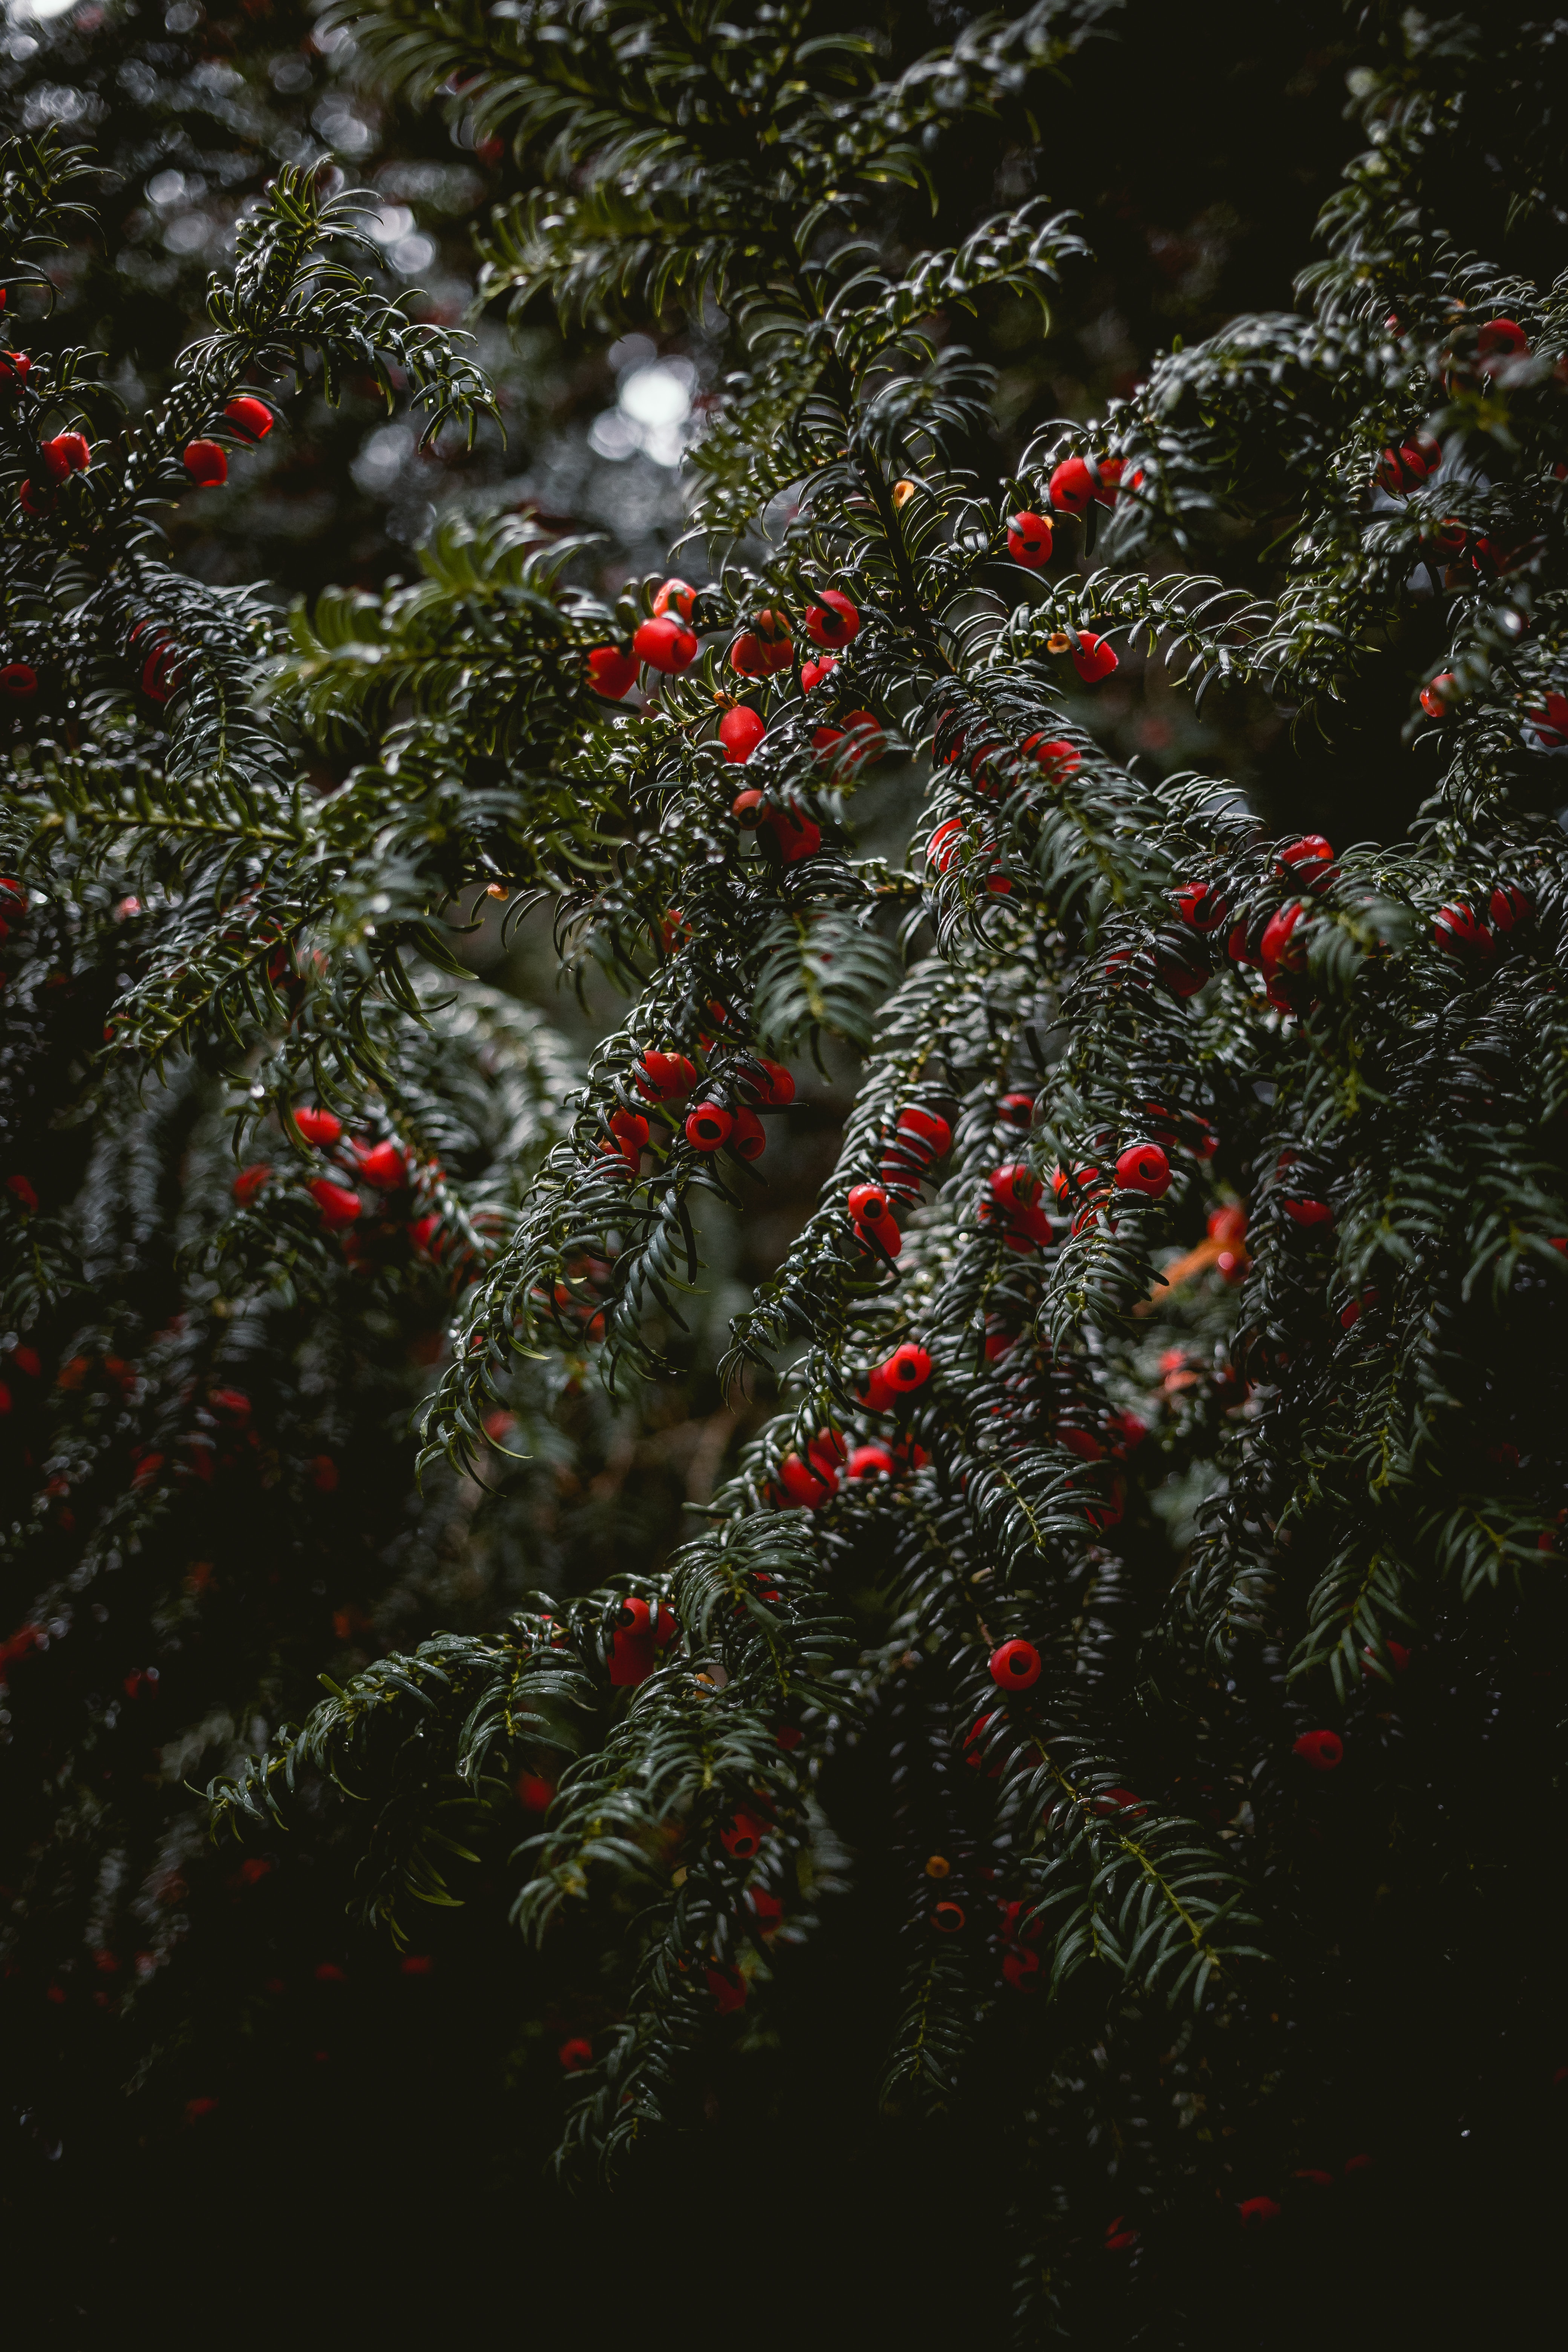 wet, nature, berries, red, plant, branches Full HD